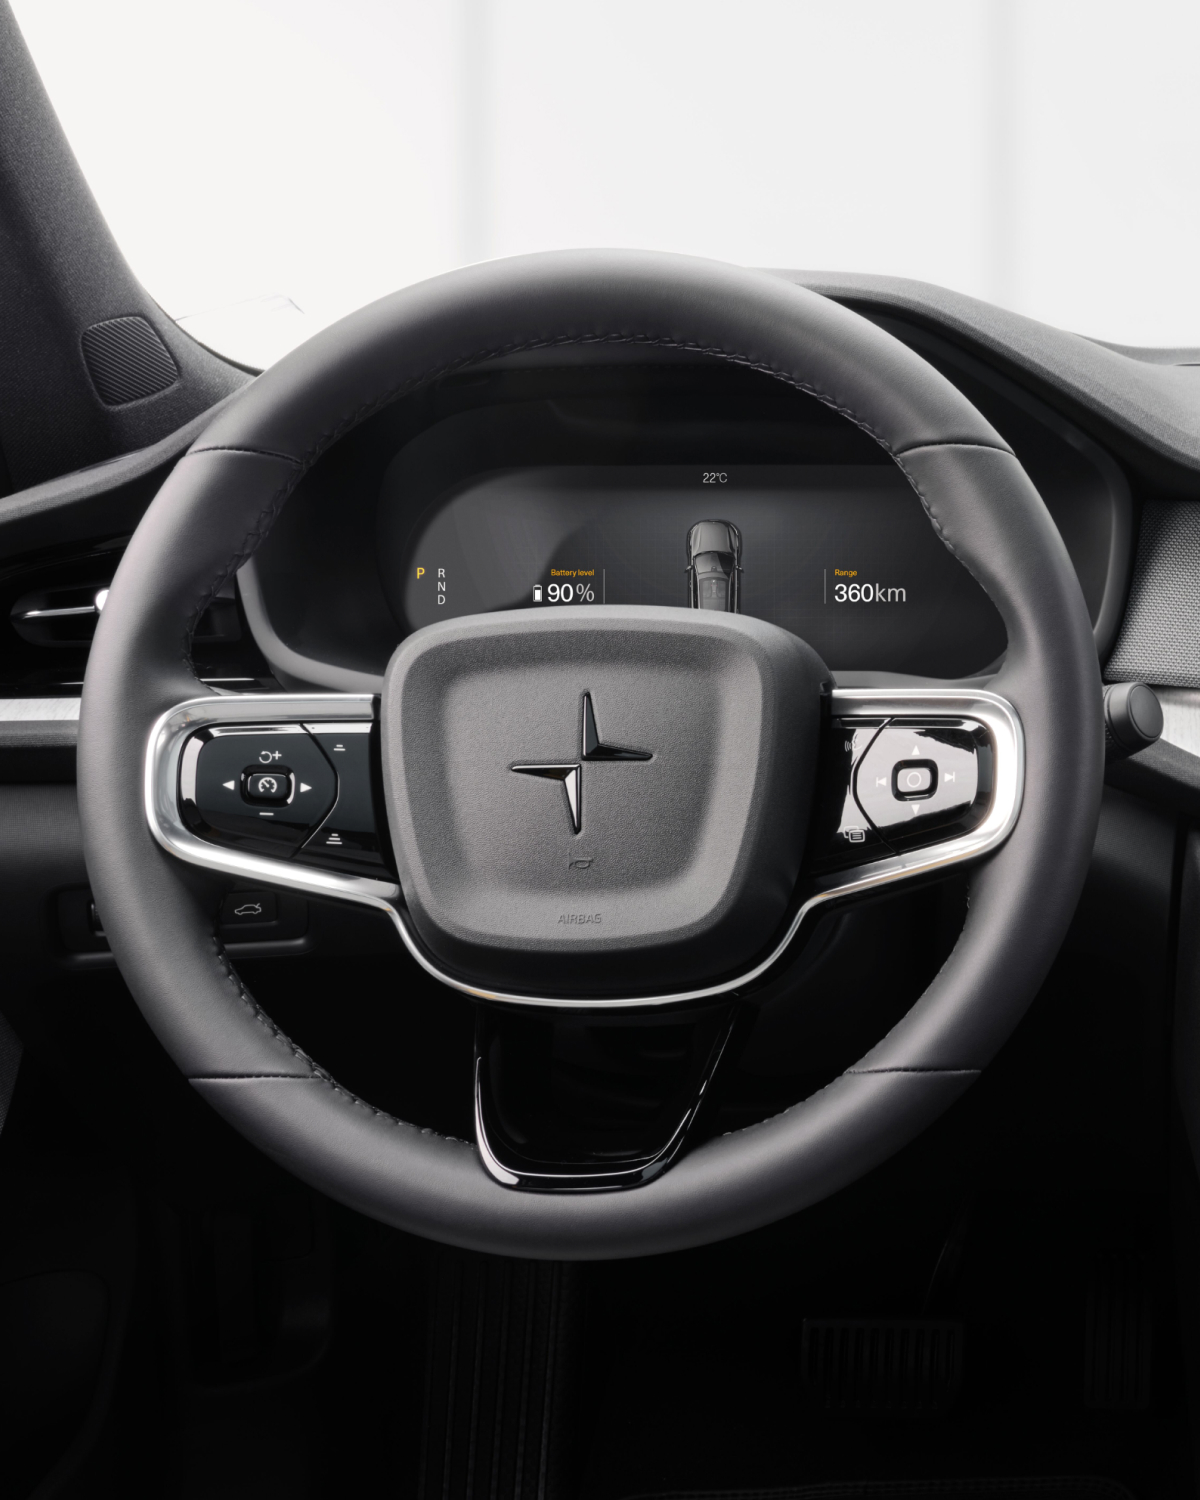 Inside the Polestar 2 showing a black steering wheel with the Polestar logo in the middle